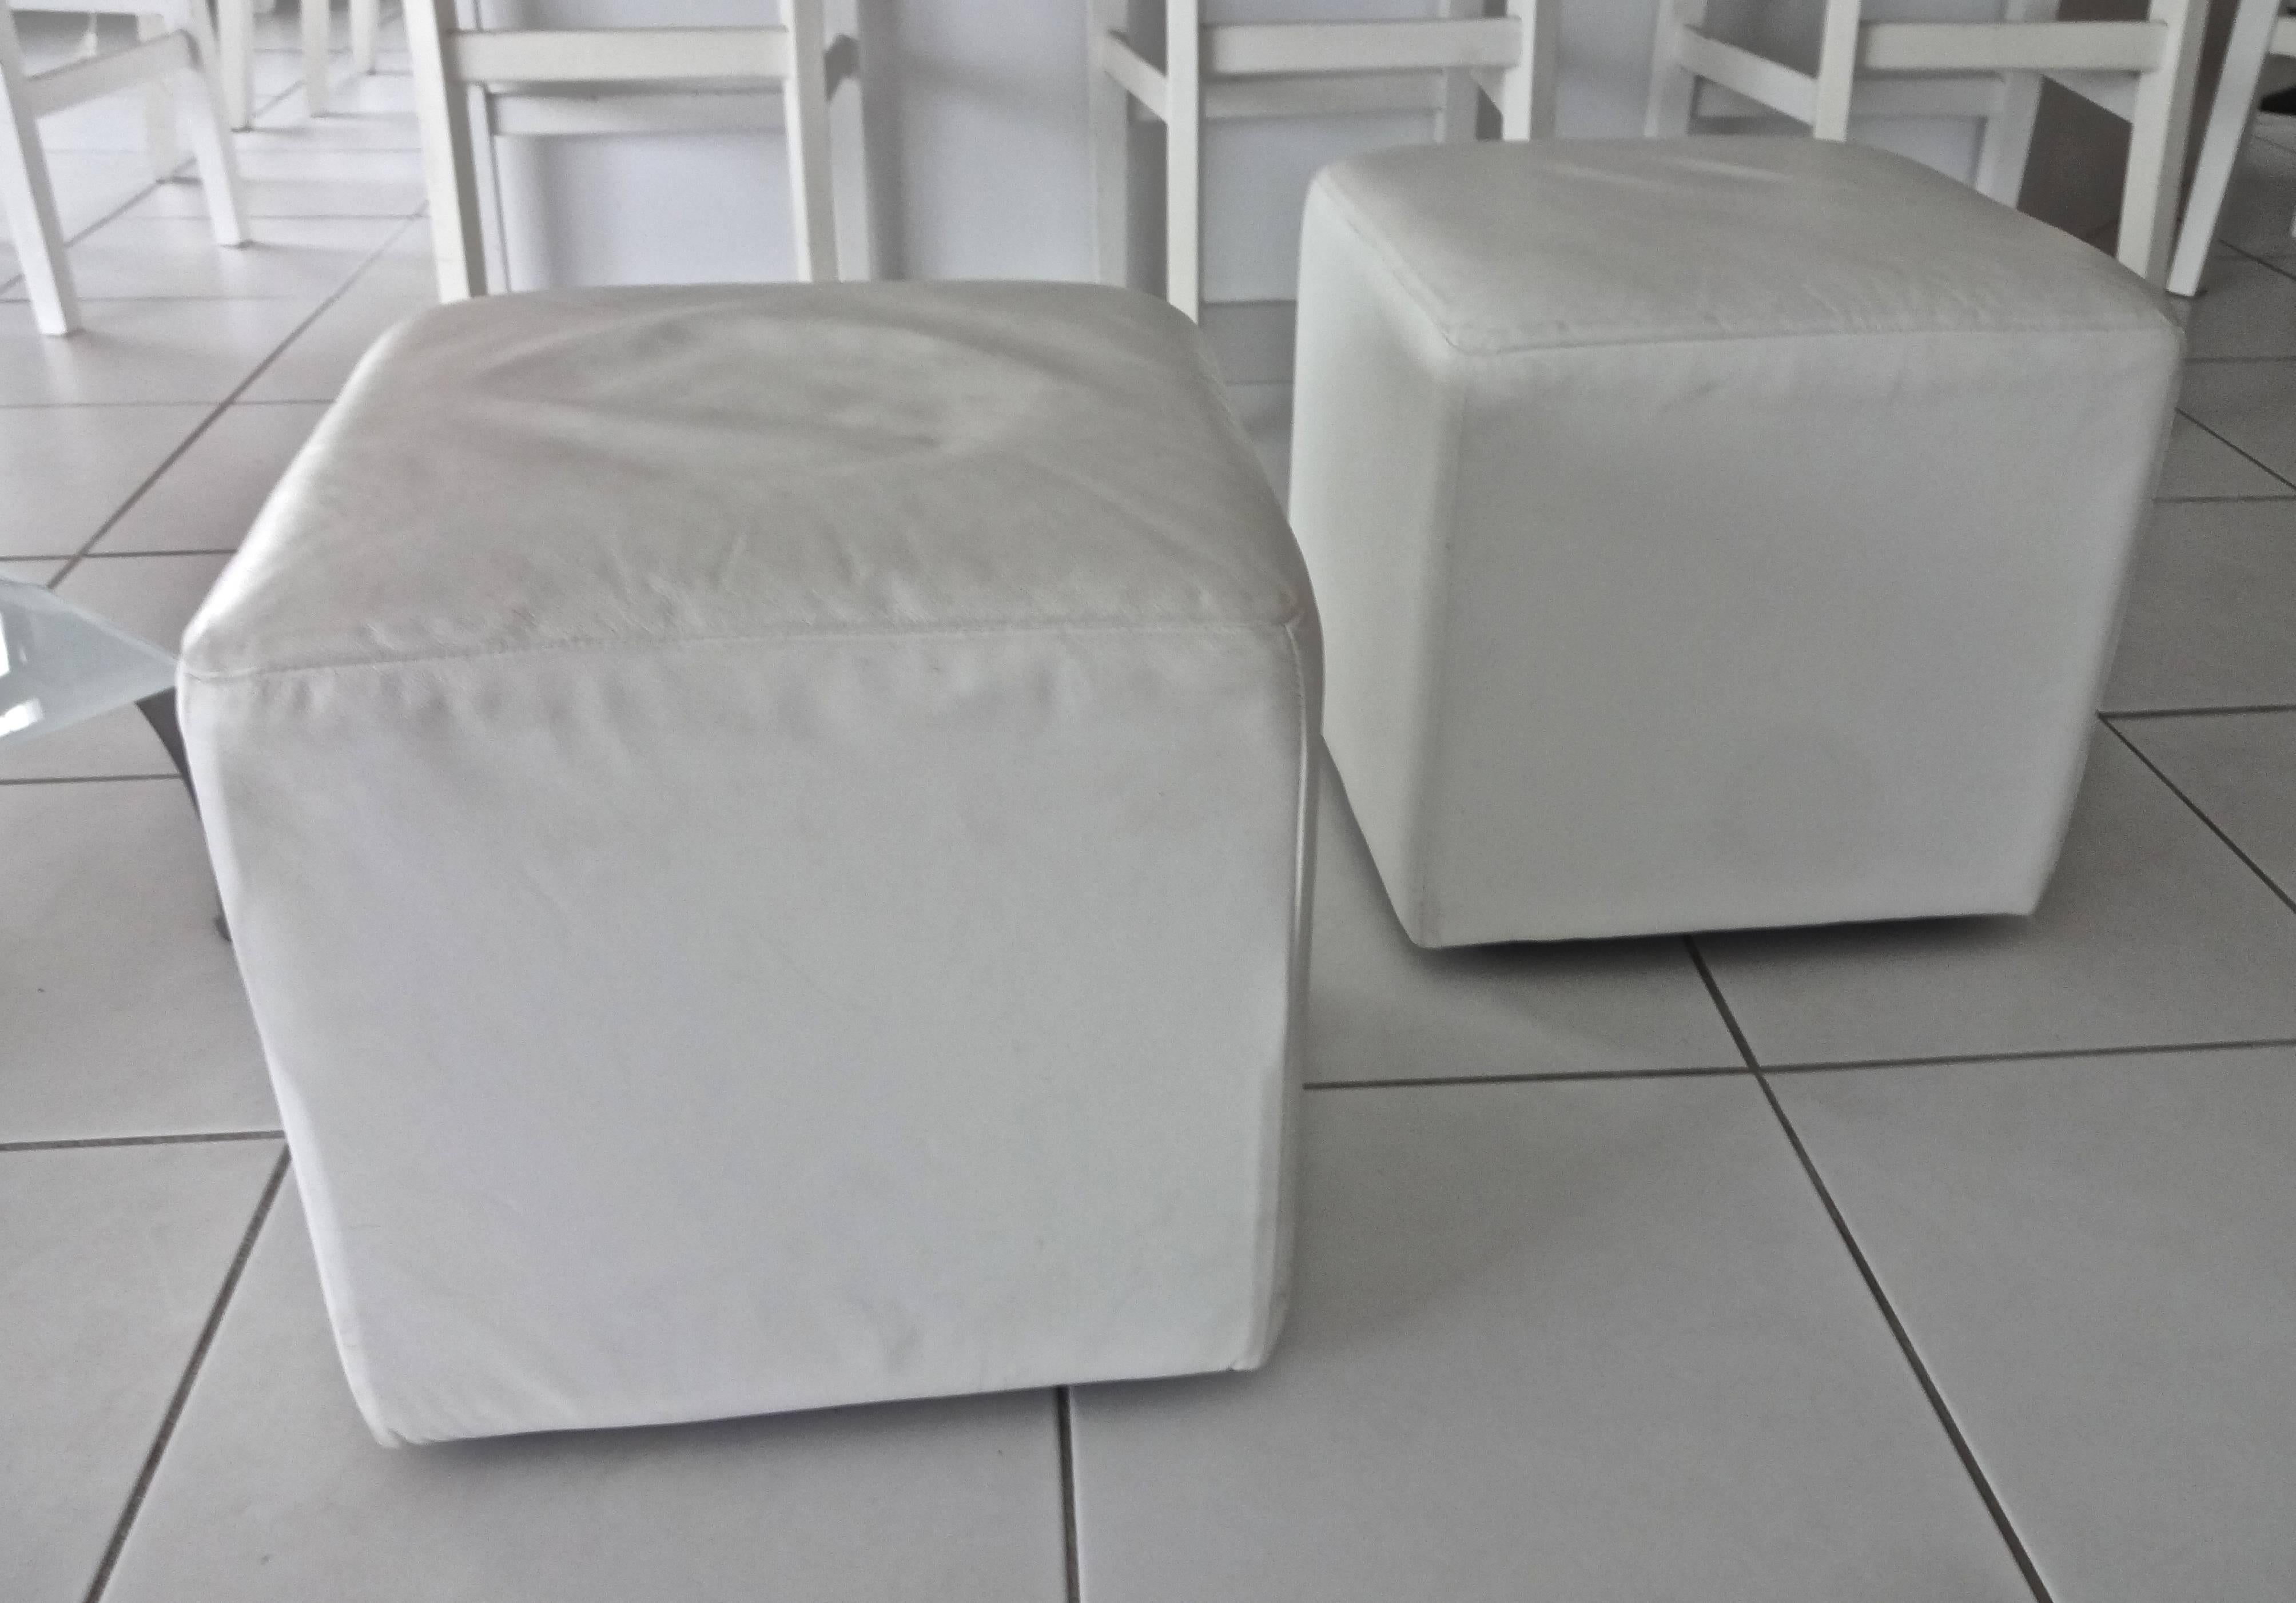 A pair of Roche Bobois white leather cubes or ottomans or stools.